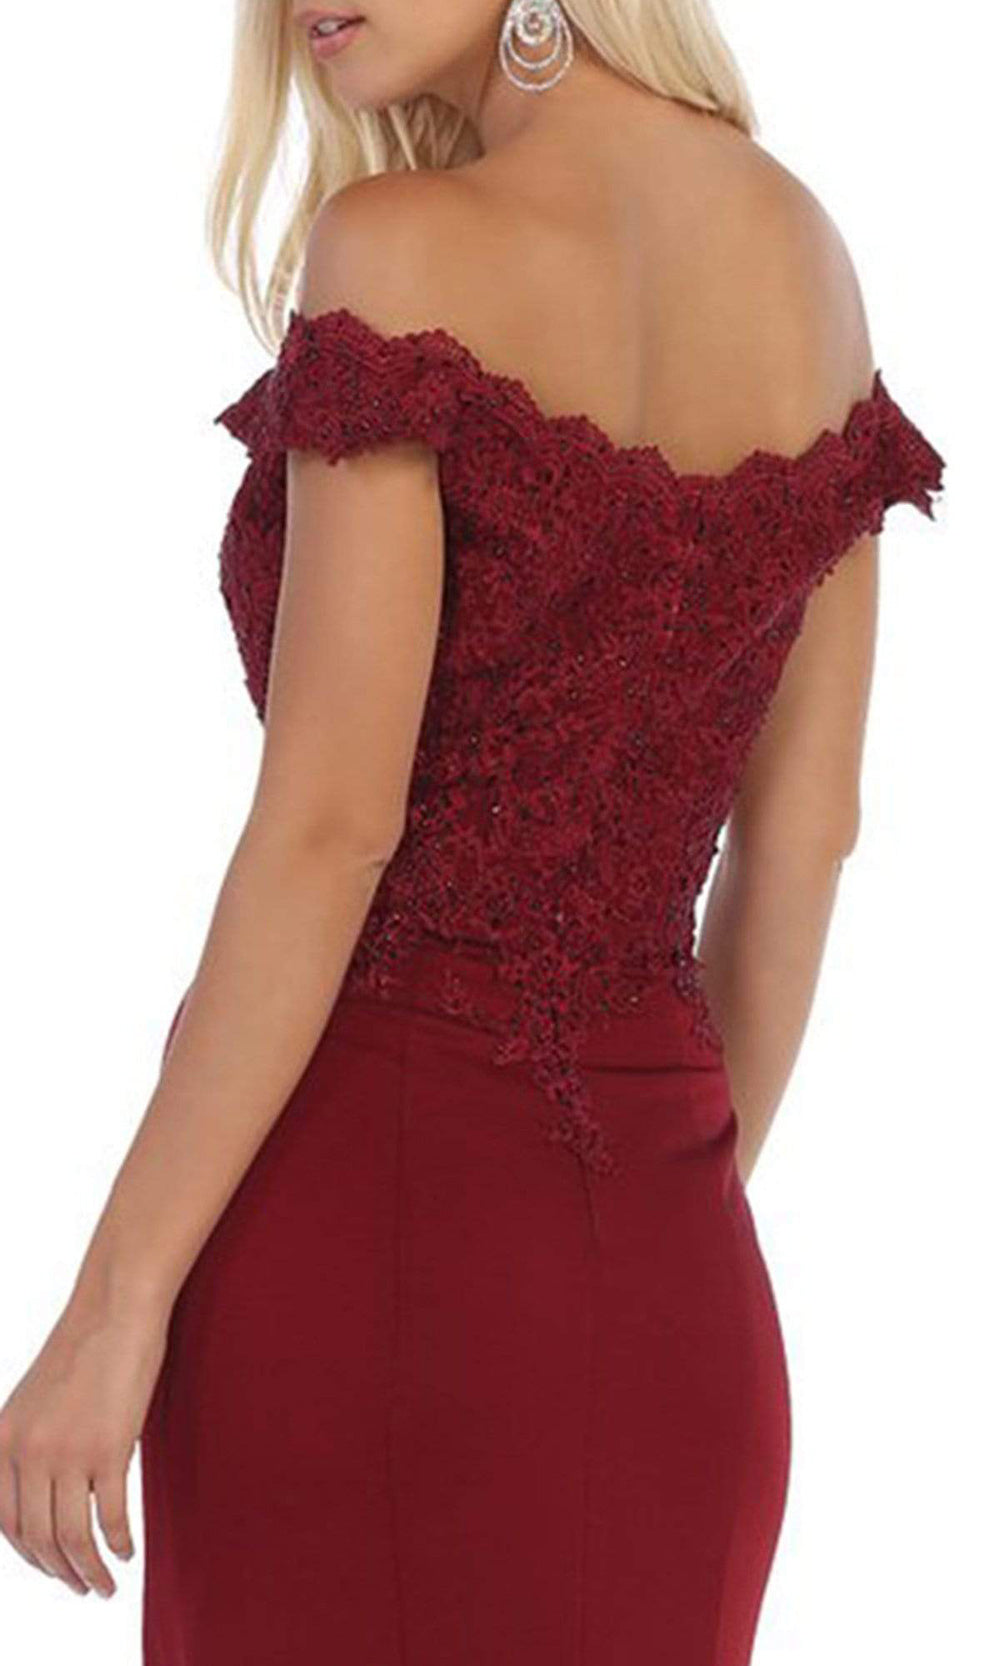 May Queen - Scalloped Off-Shoulder Trumpet Dress MQ1675 - 1 pc Burgundy In Size 6 Available CCSALE 6 / Burgundy